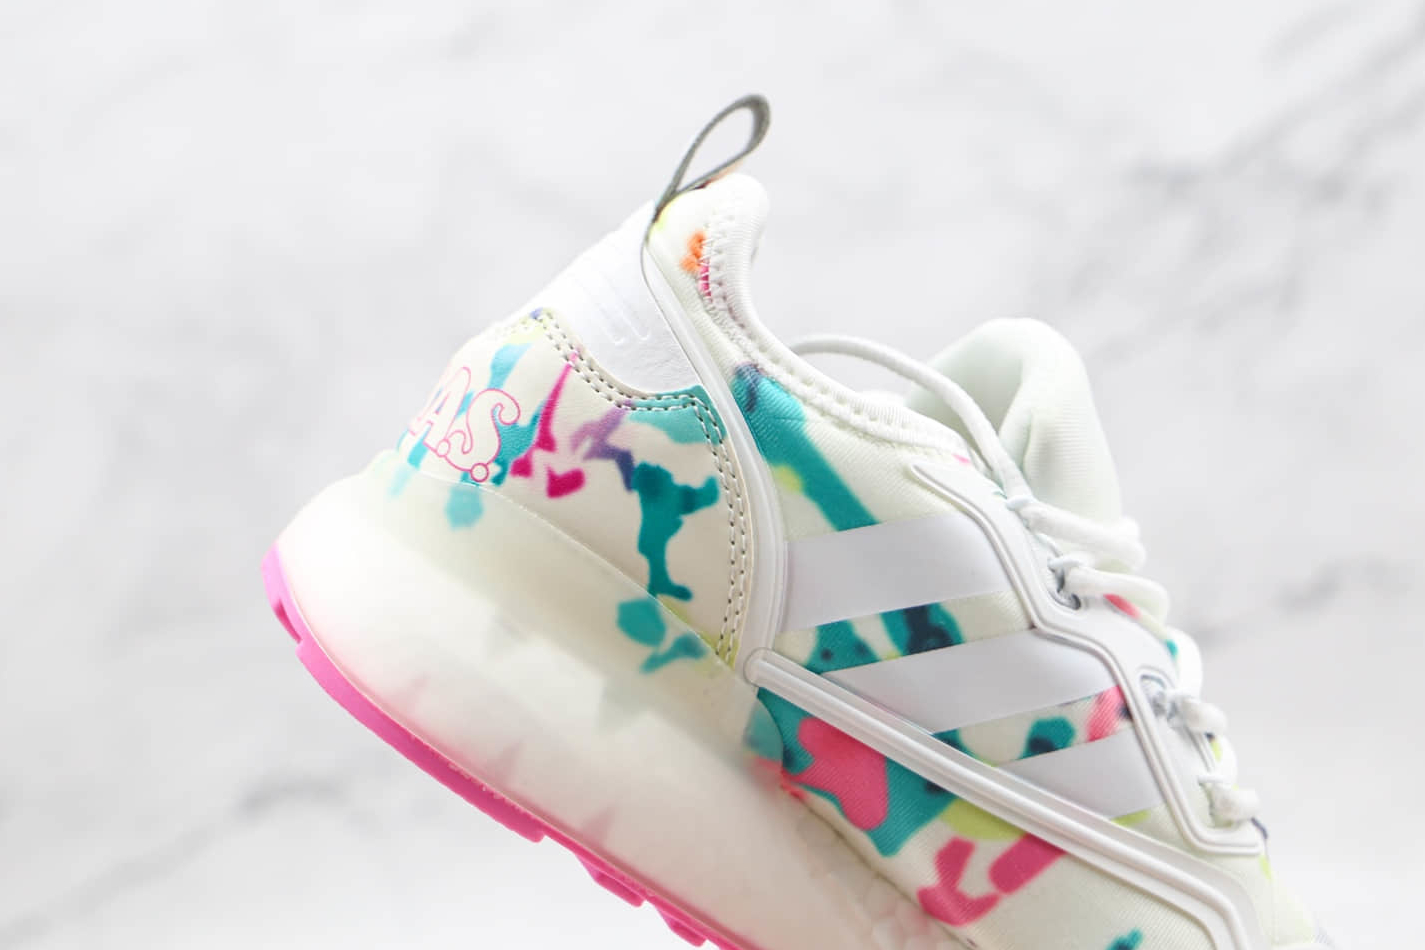 Adidas ZX 2K Boost 'Watercolor' GX5405 - Stylish and Comfortable Sneakers